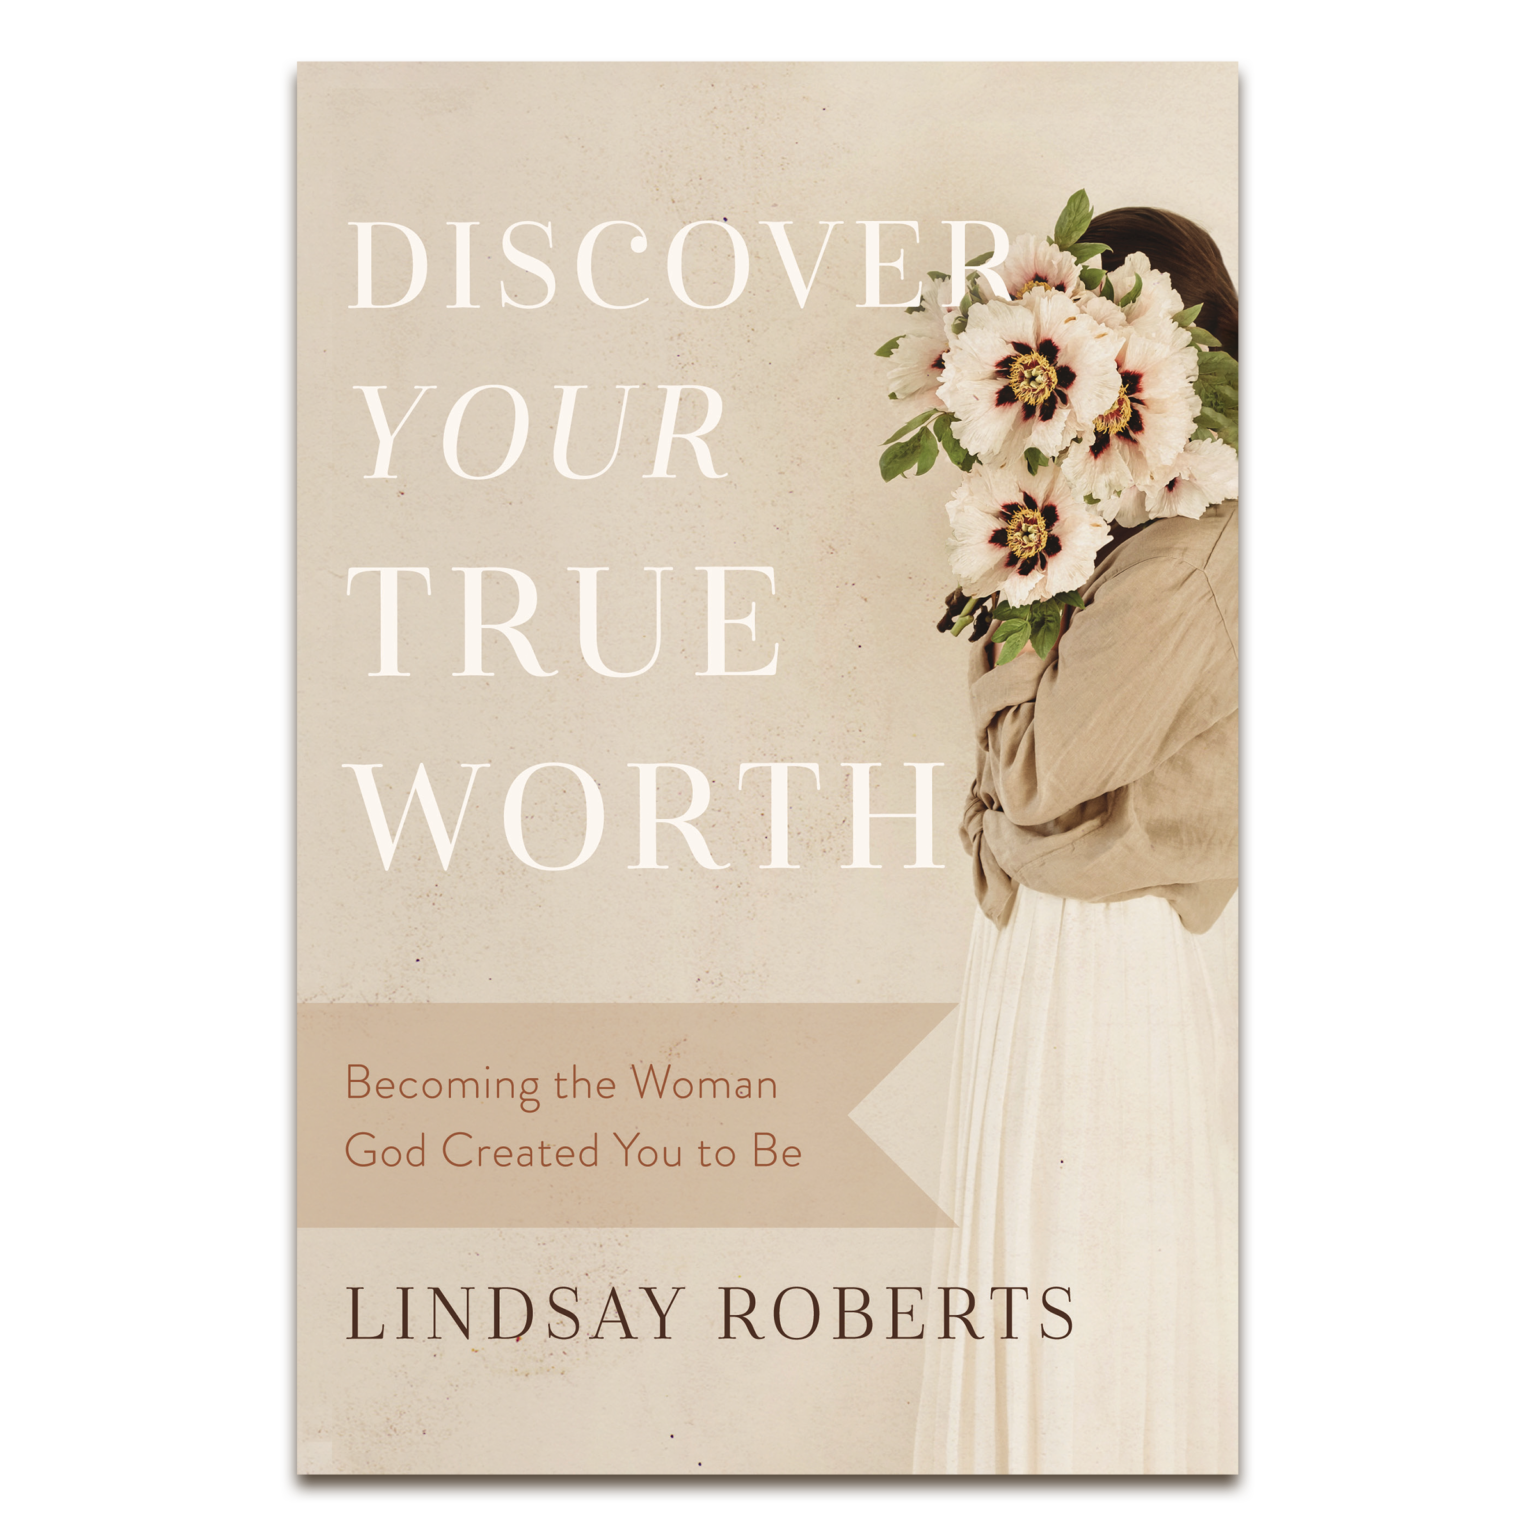 Bookcover with woman hiding behind flowers